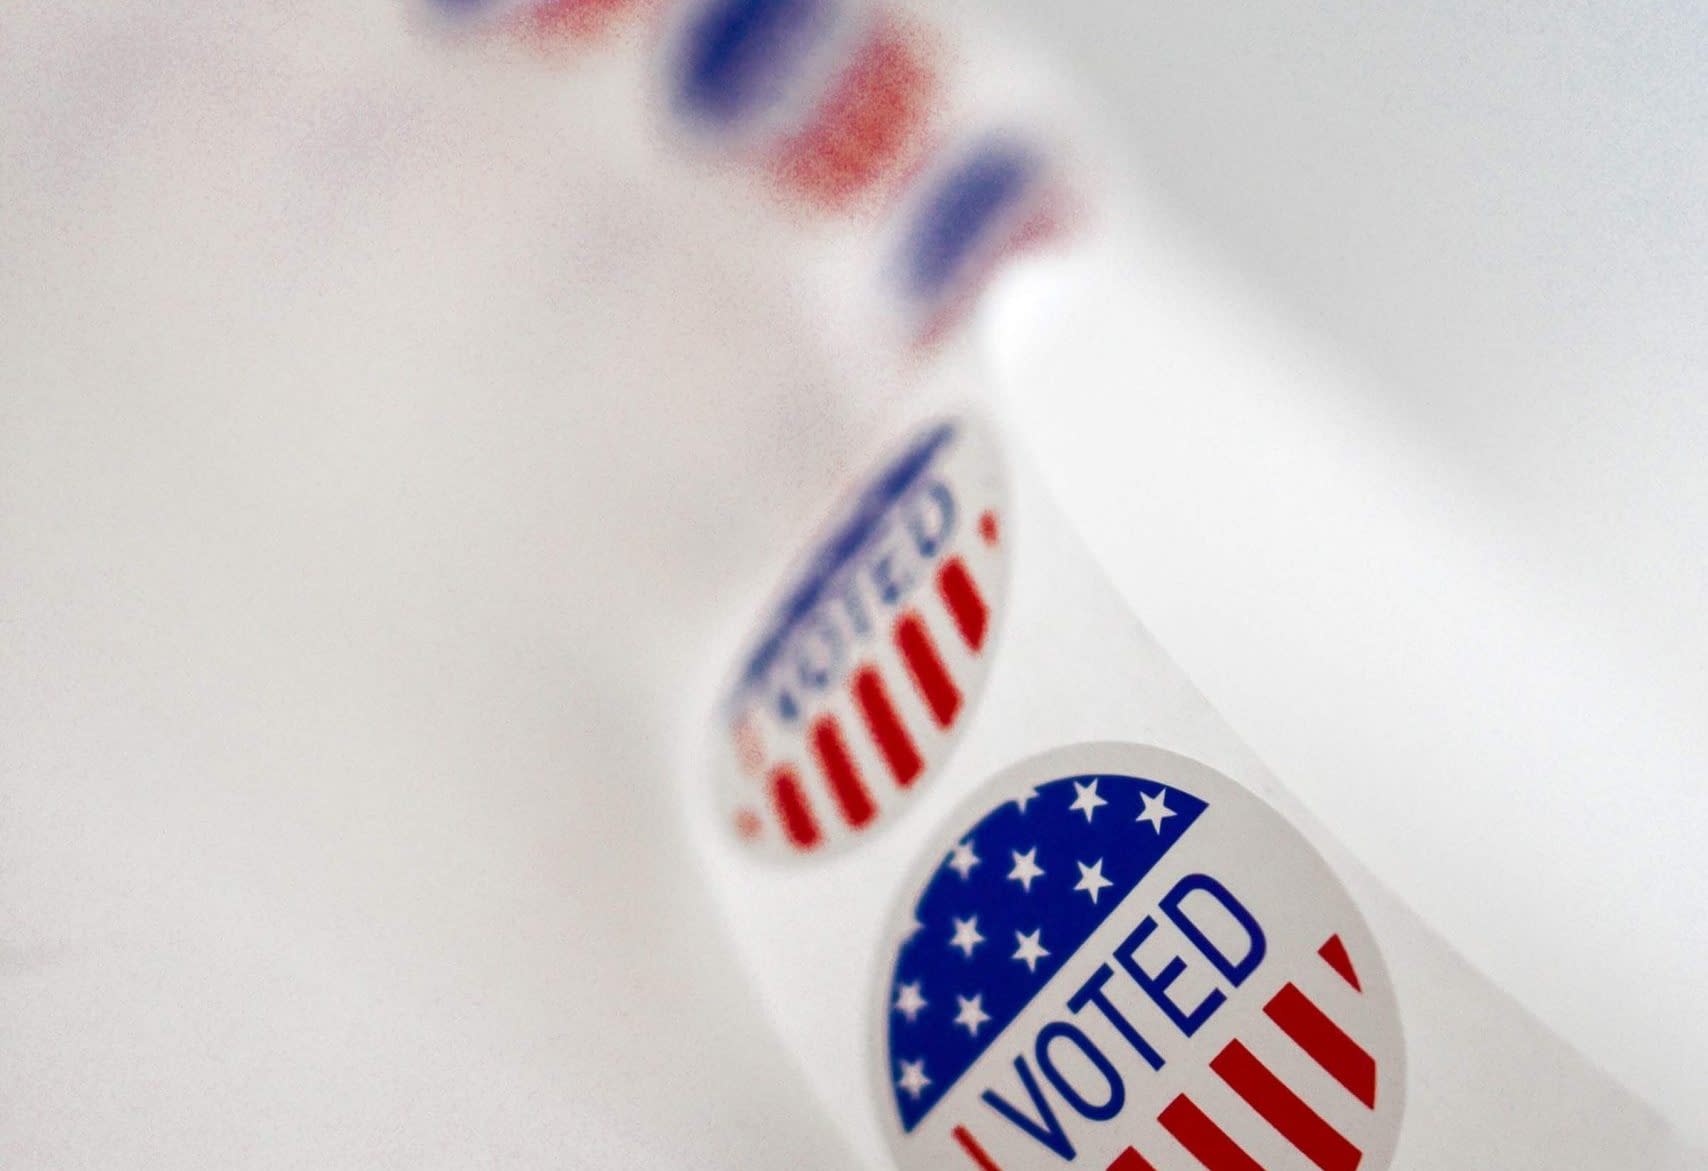 Approval Voting Ballot Measure Receives $160,000 Boost From Think Tank